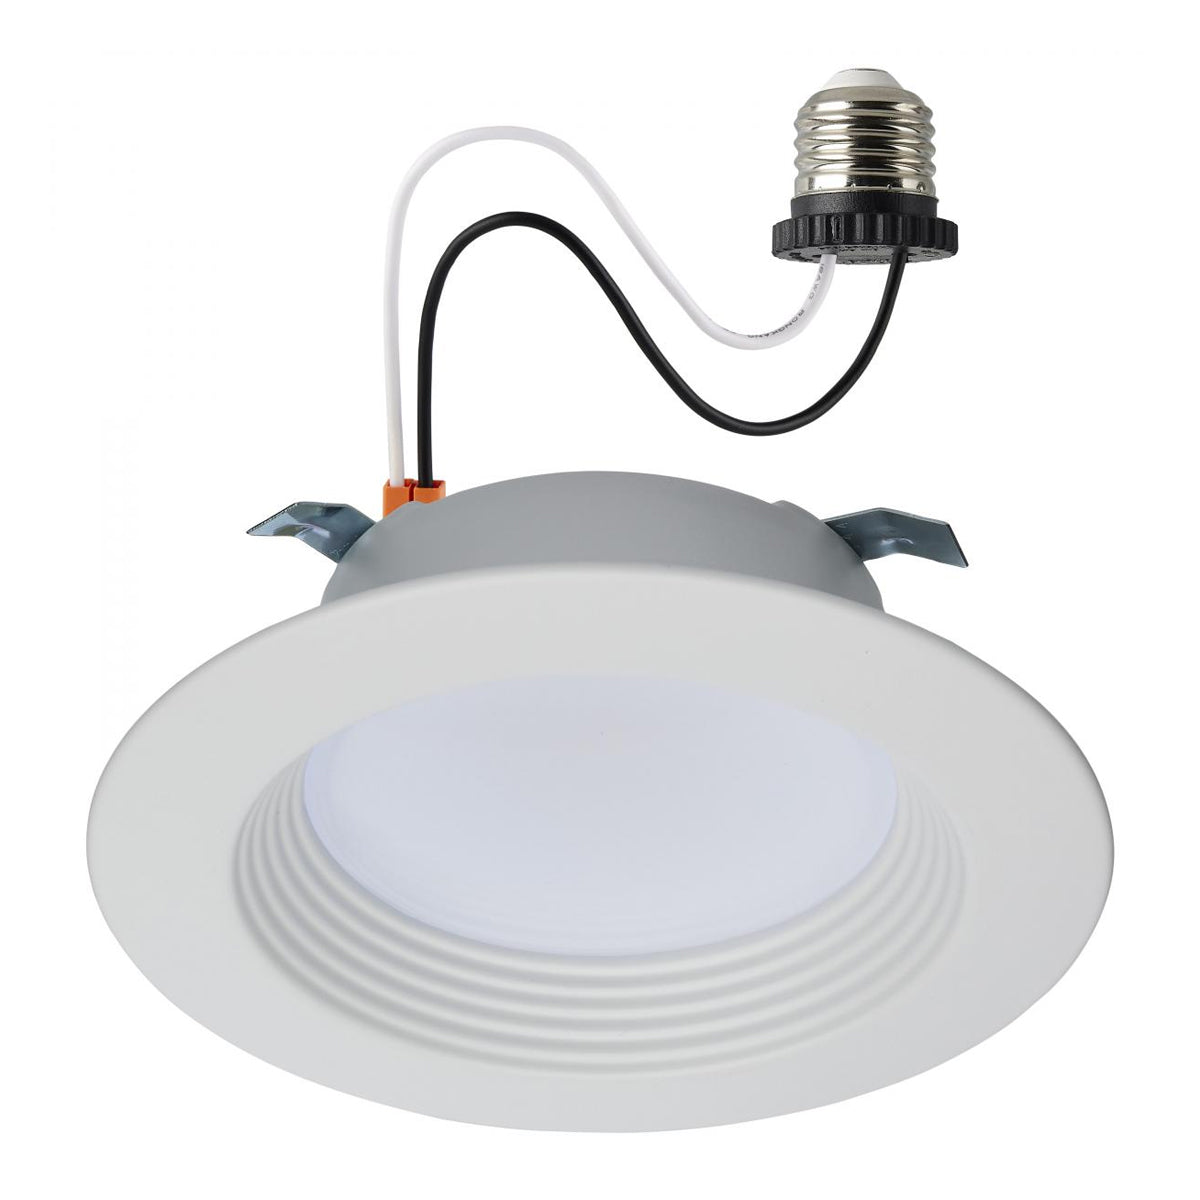 4 inch Canless LED Recessed Light, Round, 6.7 Watt, 600 Lumens, Selectable CCT, 2700K to 5000K, Baffle Trim